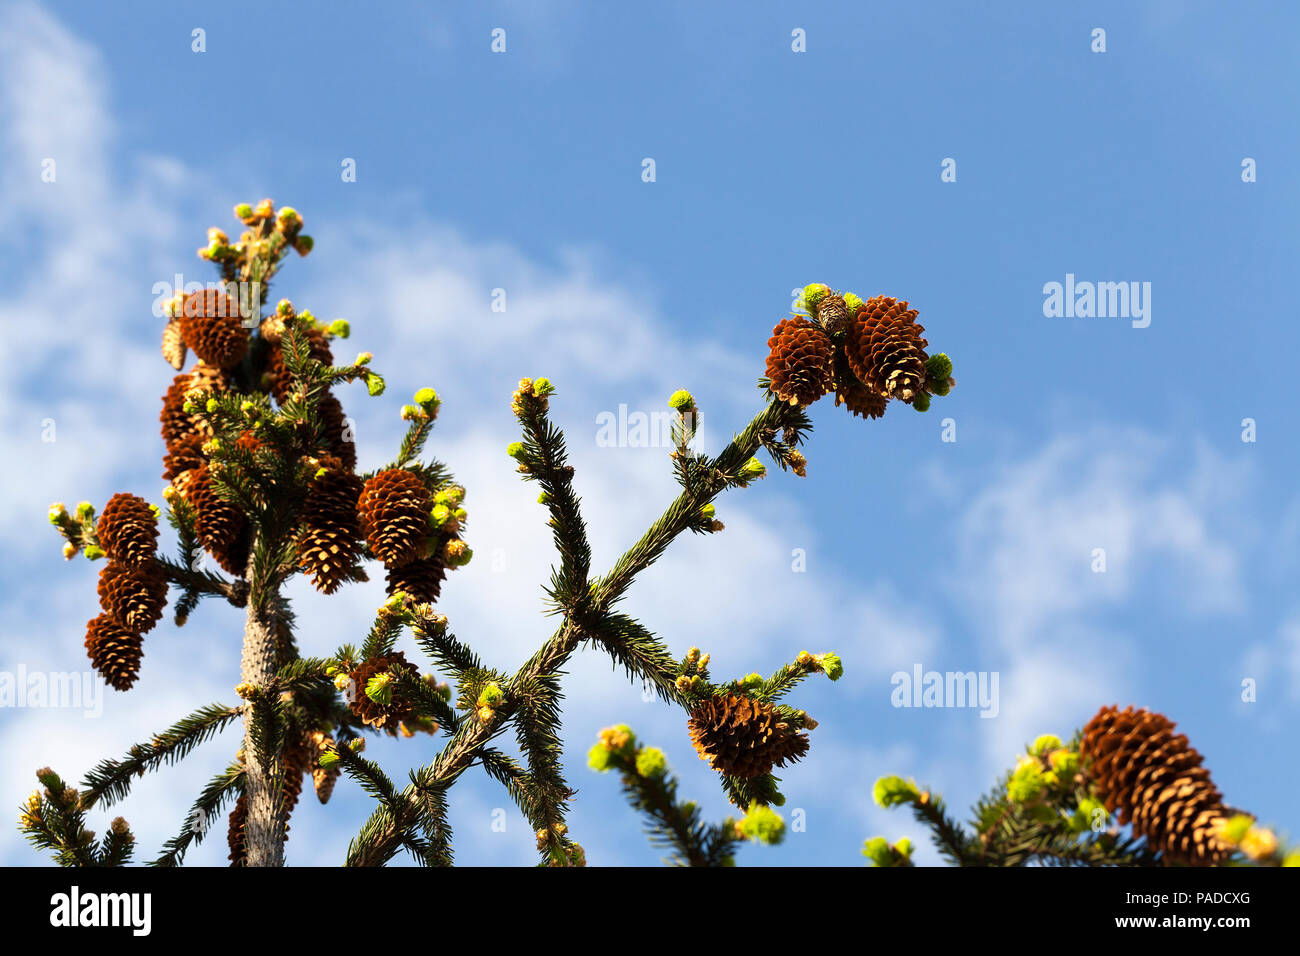 young growths and cones with old brown cones against the blue sky, spring nature Stock Photo